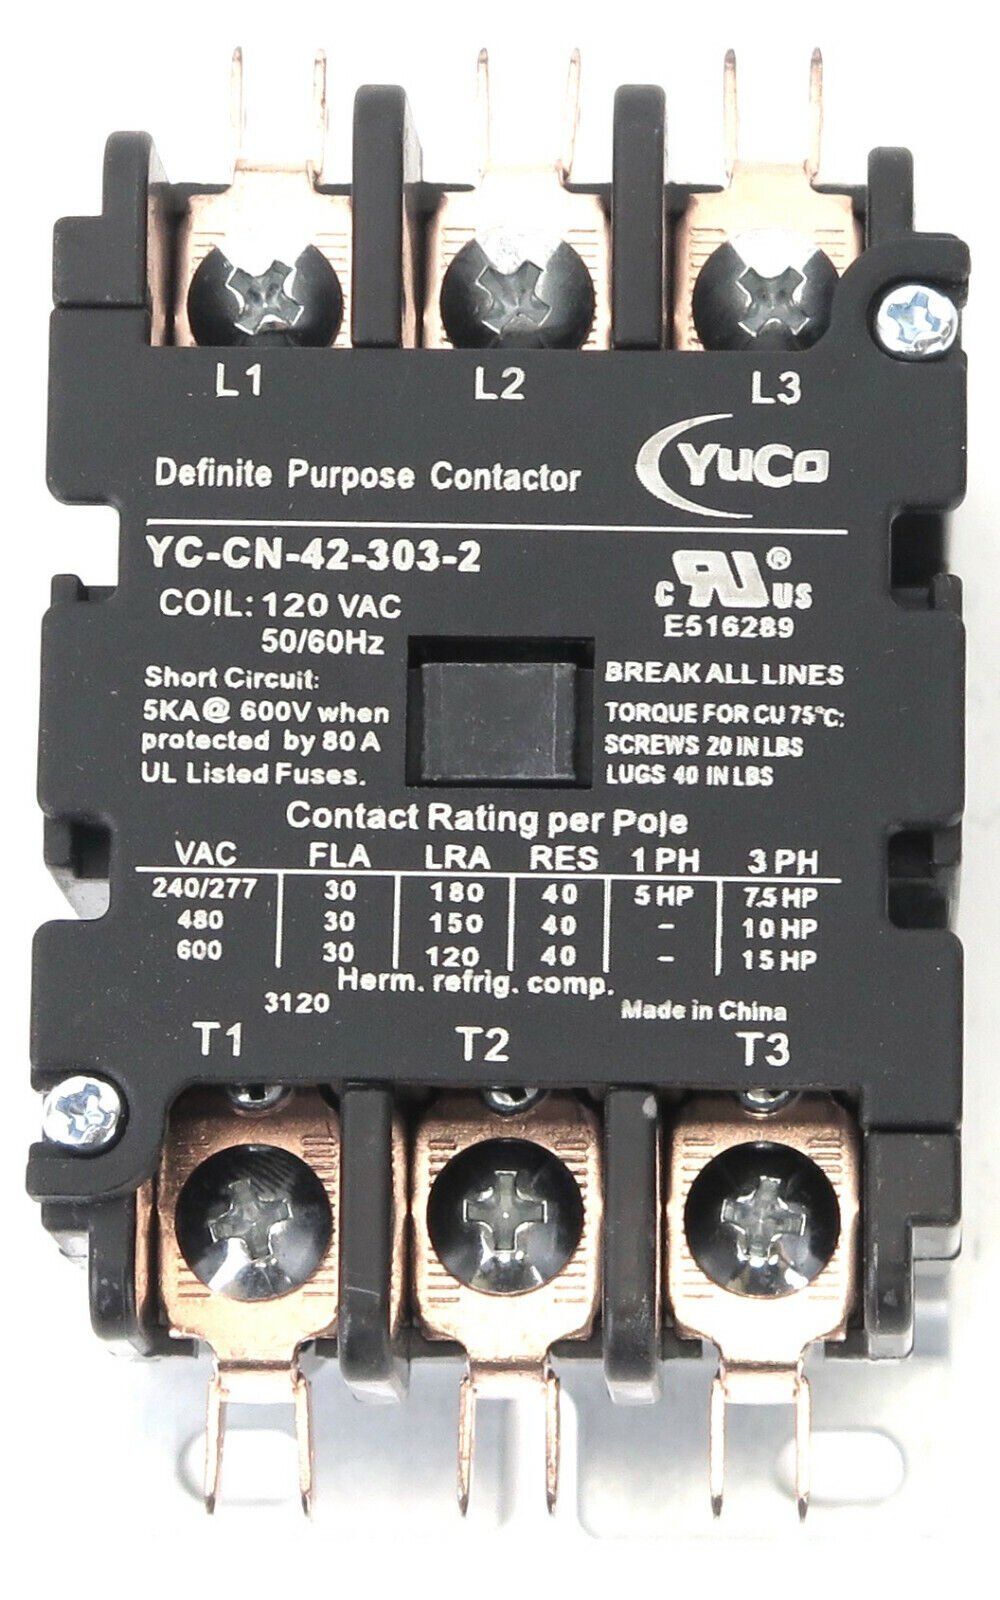 Air Conditioning Contactor FLA 30A 600V 3P 120V Coil FITS SIEMENS 42BF35AF